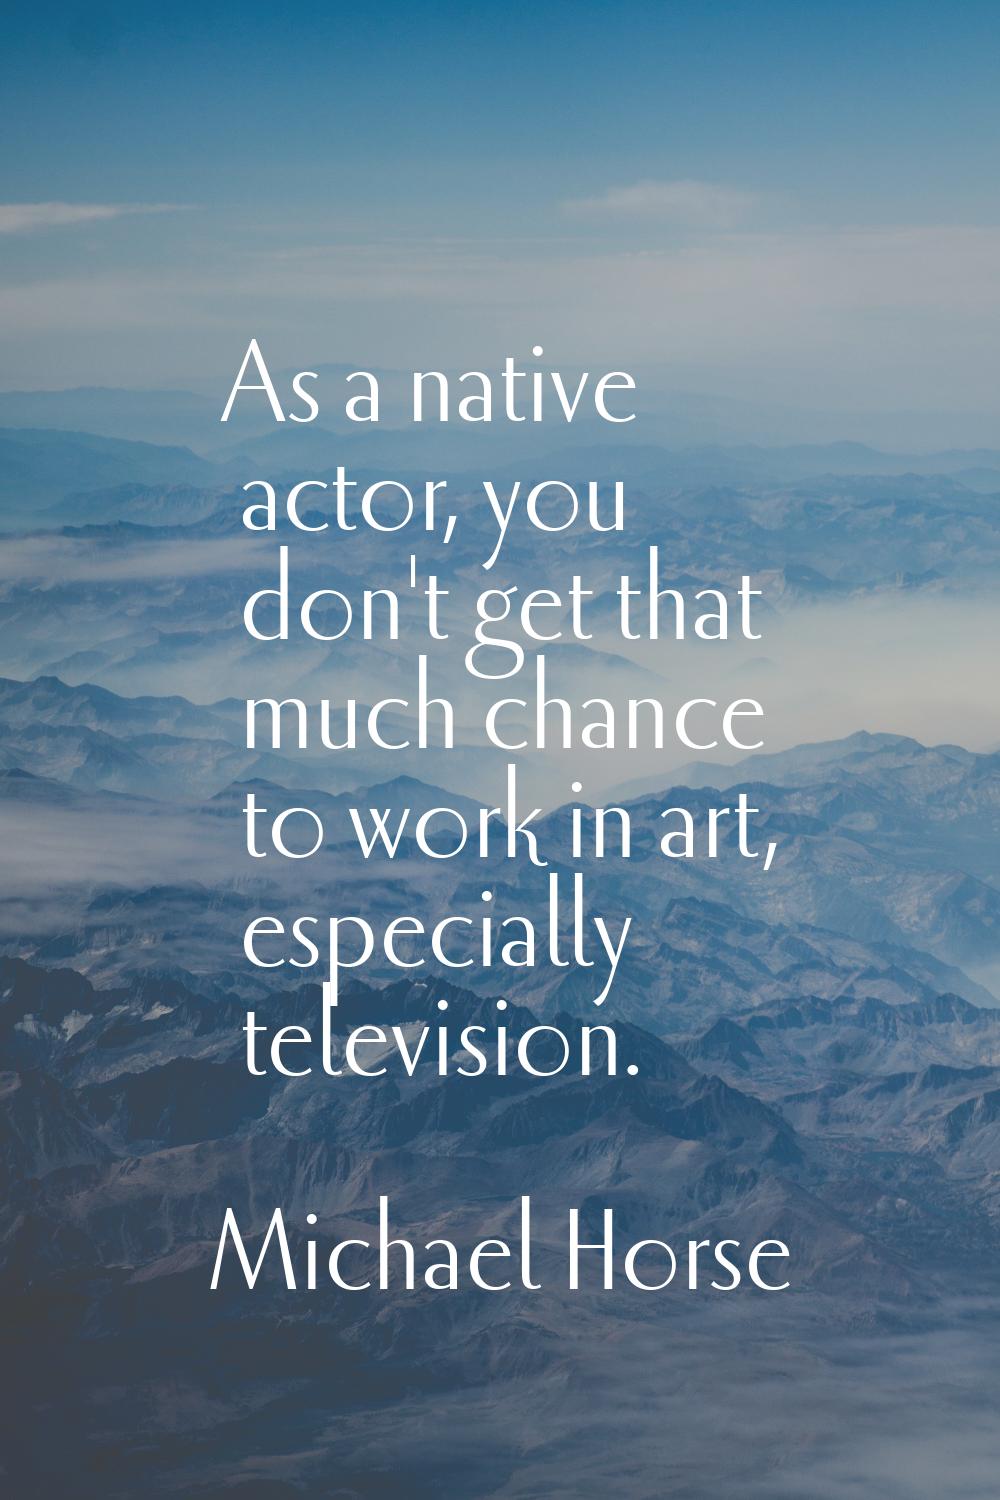 As a native actor, you don't get that much chance to work in art, especially television.